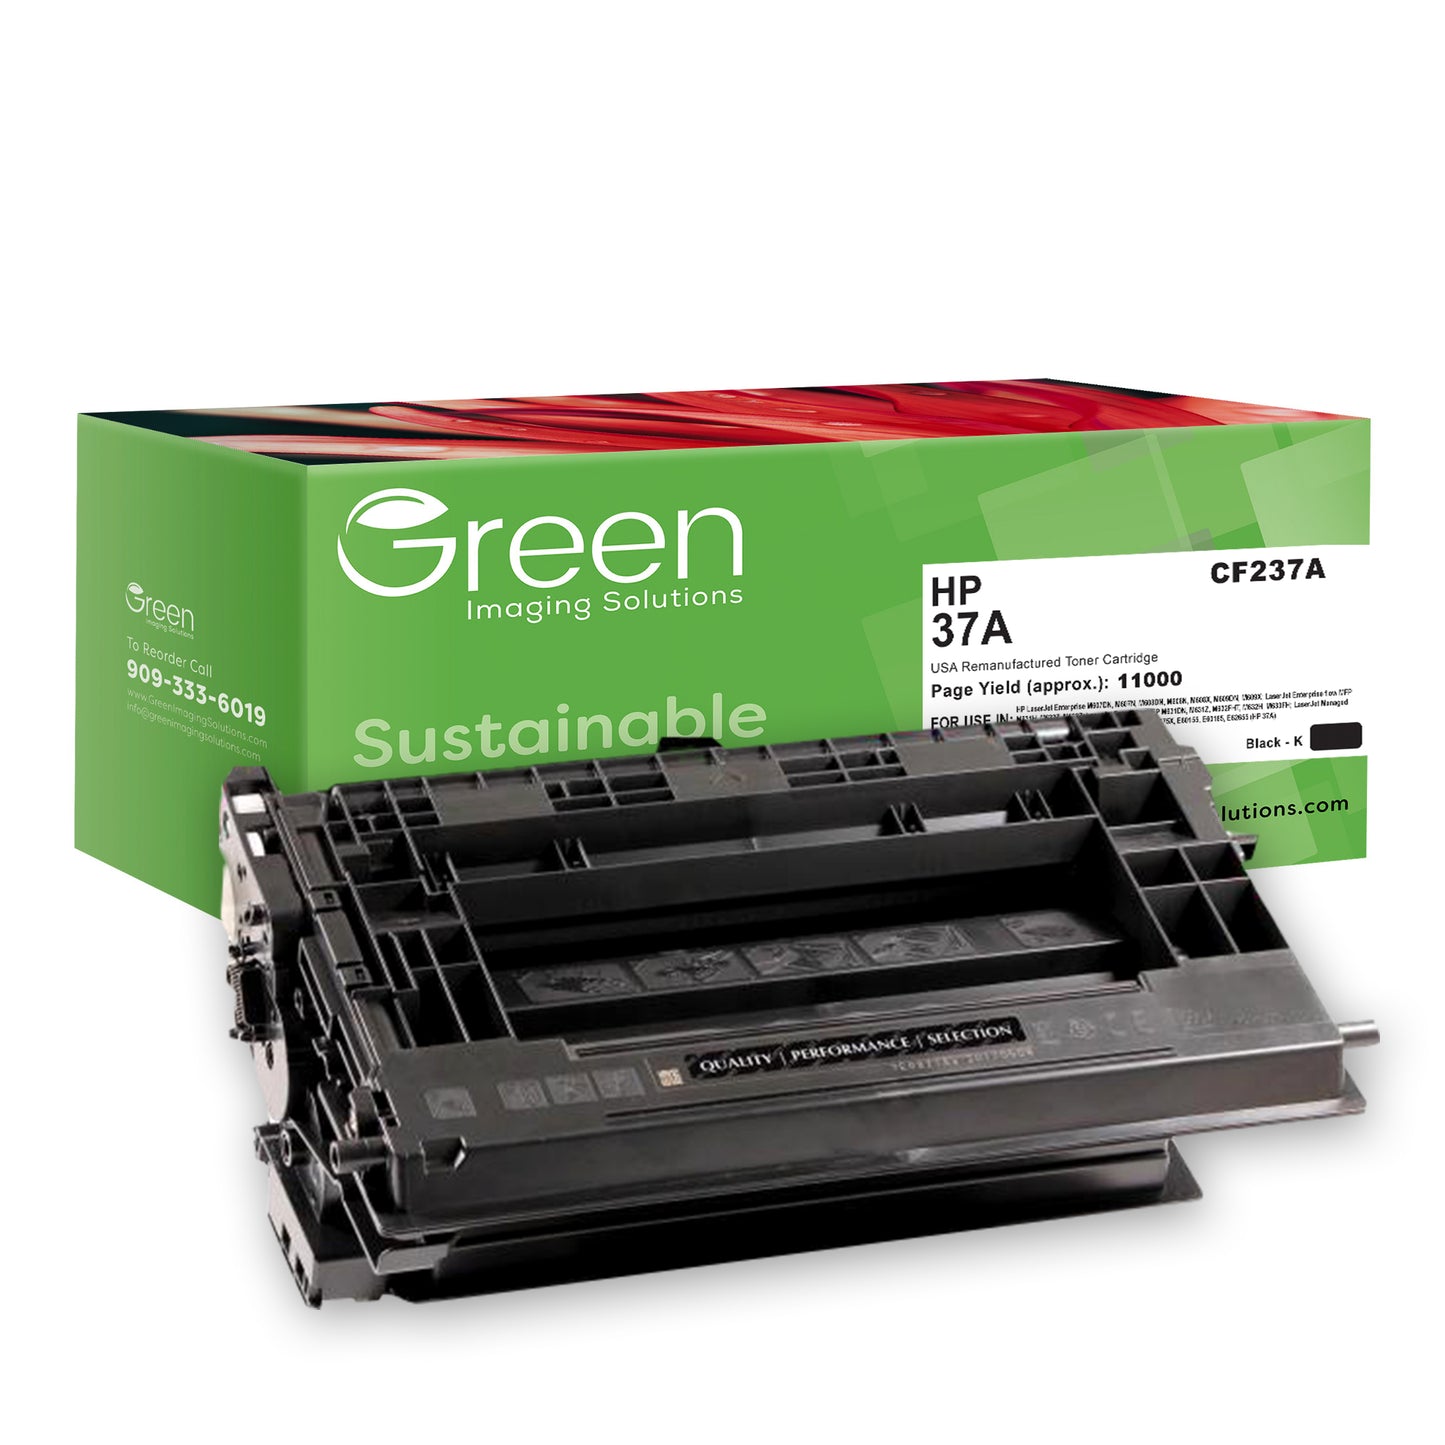 GIS USA Remanufactured Toner Cartridge for HP CF237A (HP 37A)